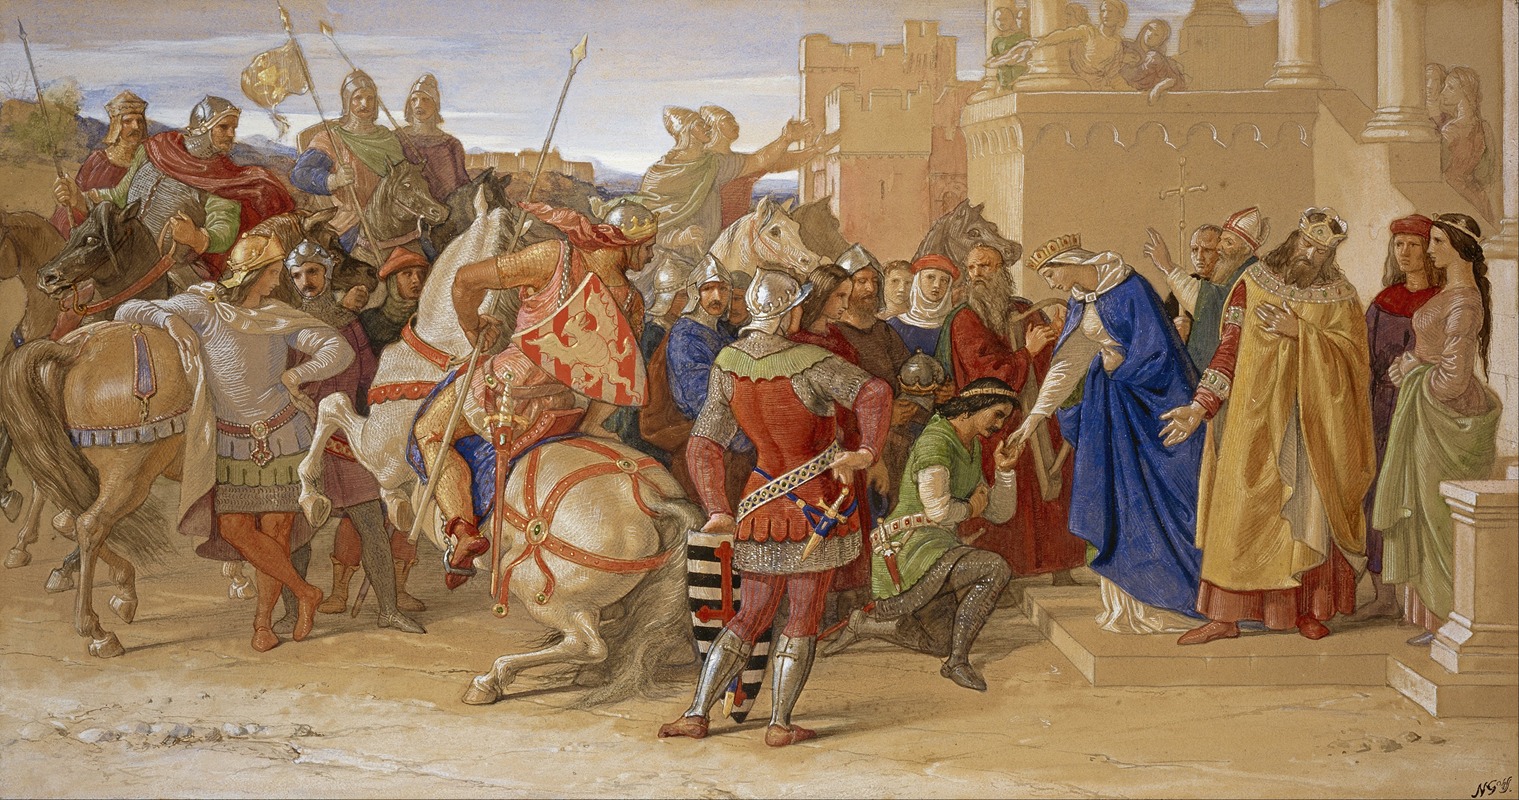 William Dyce - Piety; The Knights of the Round Table about to Depart in Quest of the Holy Grail